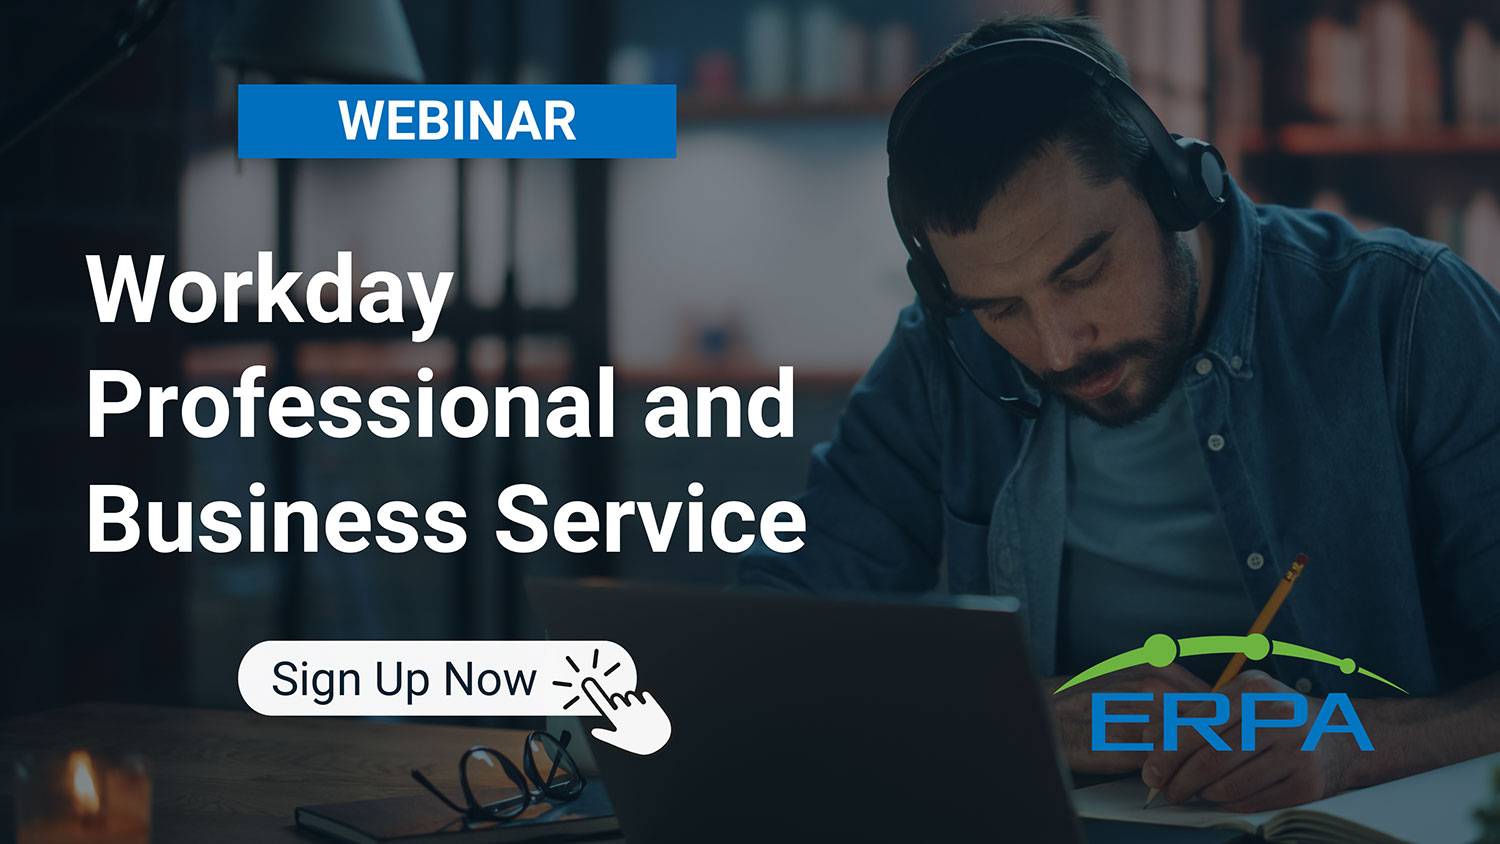 ERPA Webinar: Workday Professional and Business Service